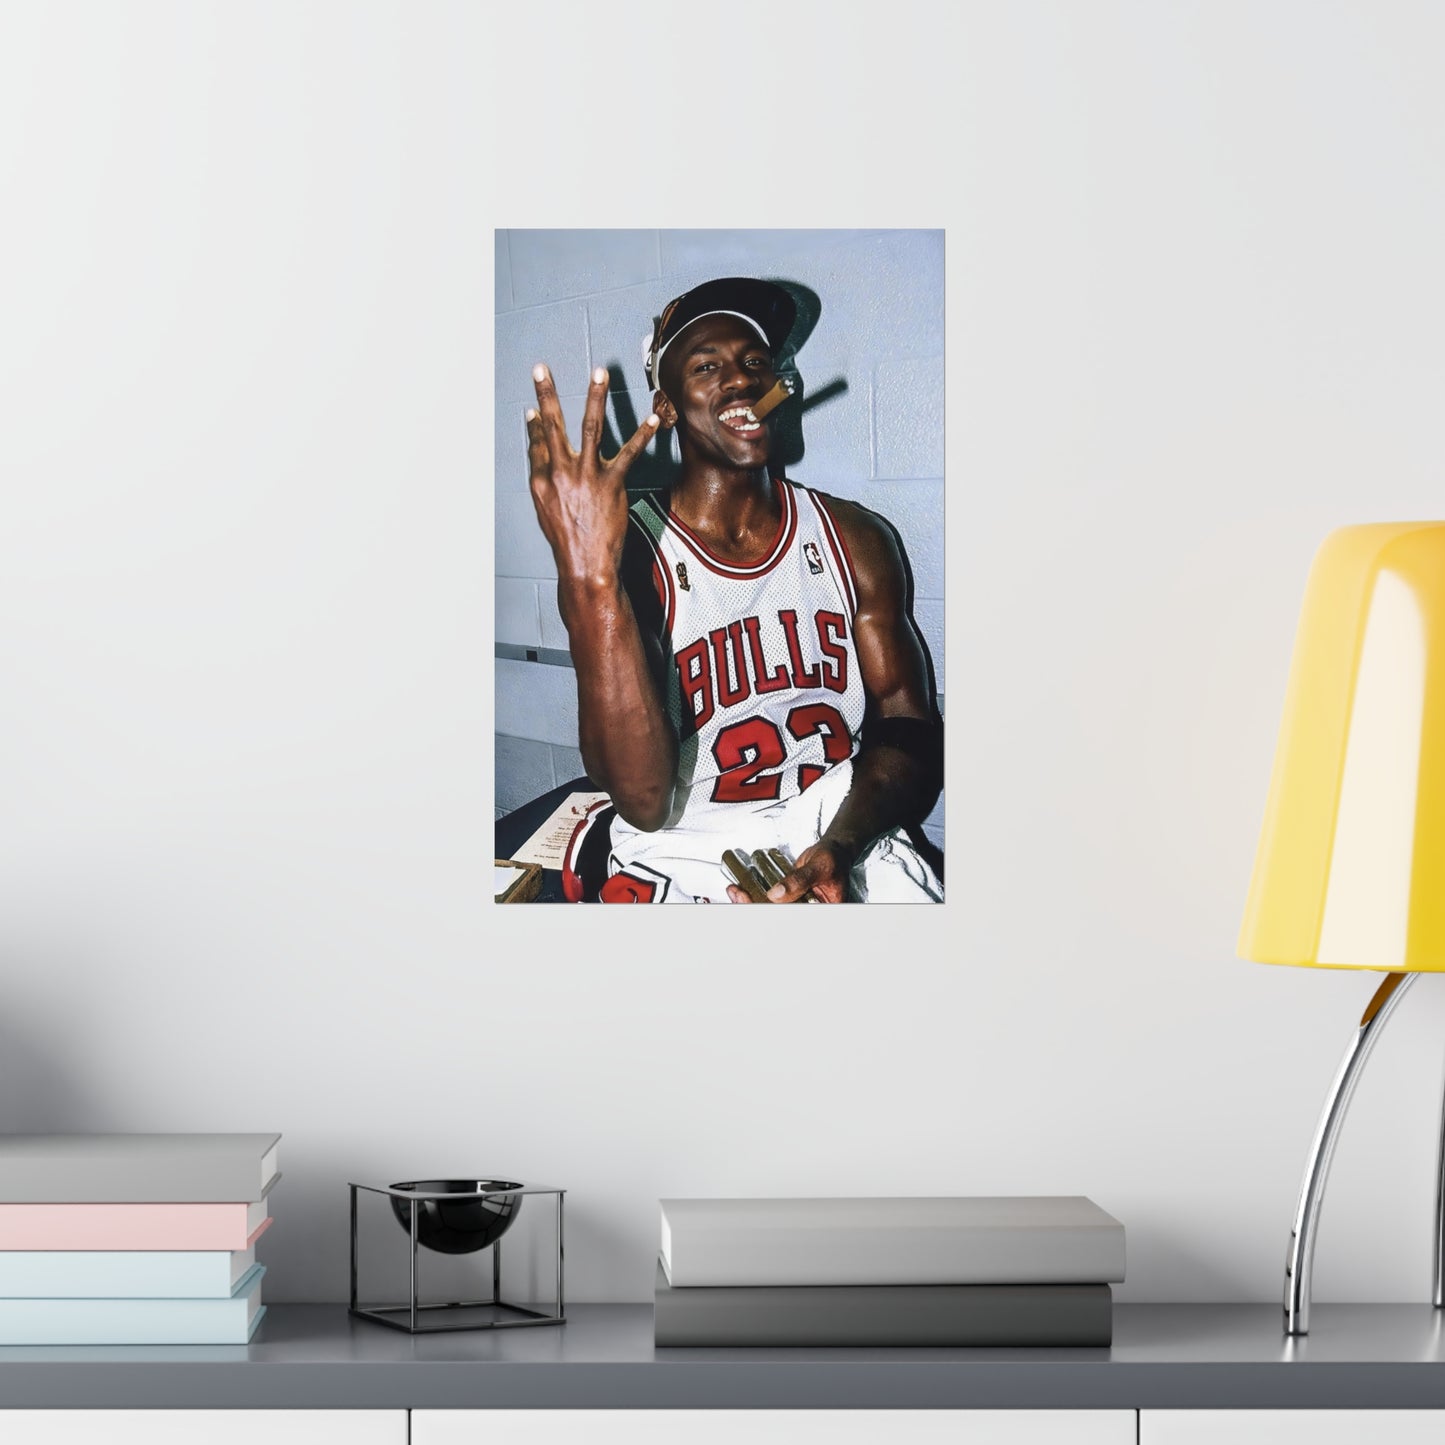 Michael Jordan Shows Four Fingers While Smoking Cigar After Winning Fourth NBA Championship With Chicago Bulls Poster